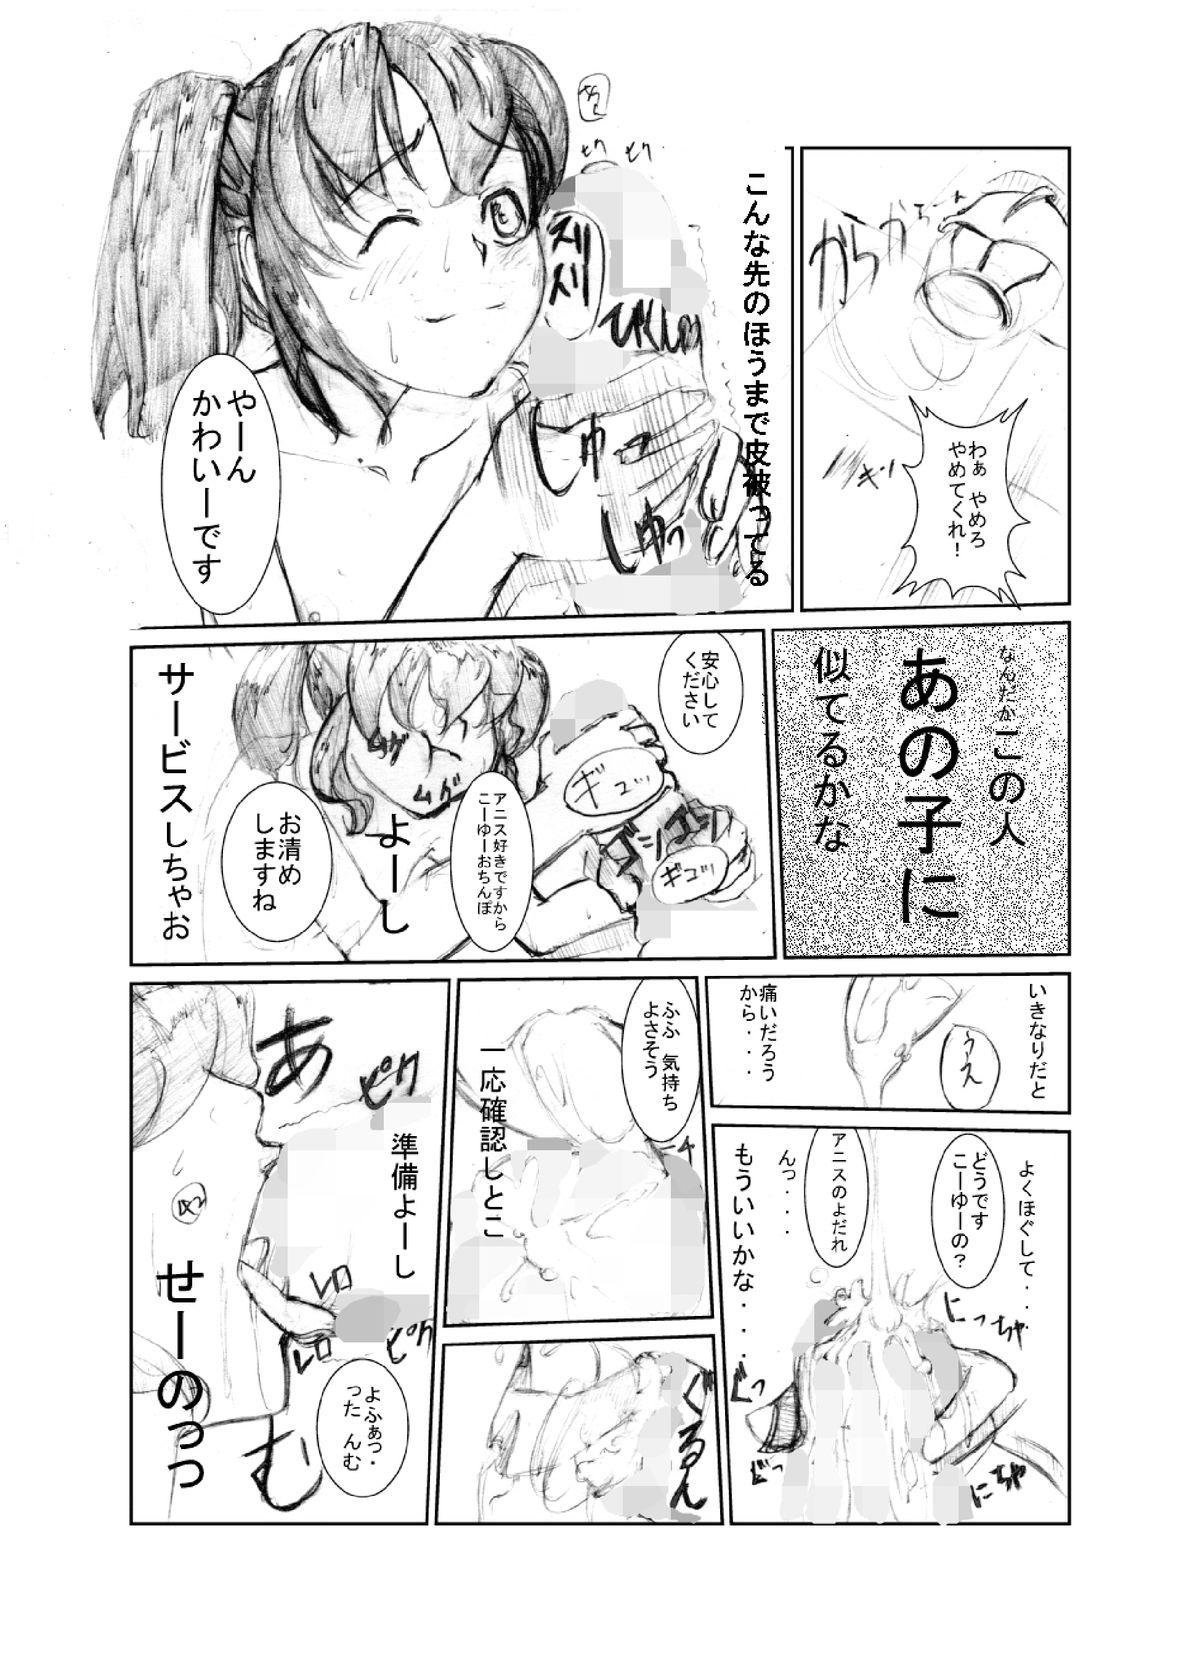 Gloryholes 虹は溶けゆく 朝焼けに - Tales of the abyss Pretty - Page 11